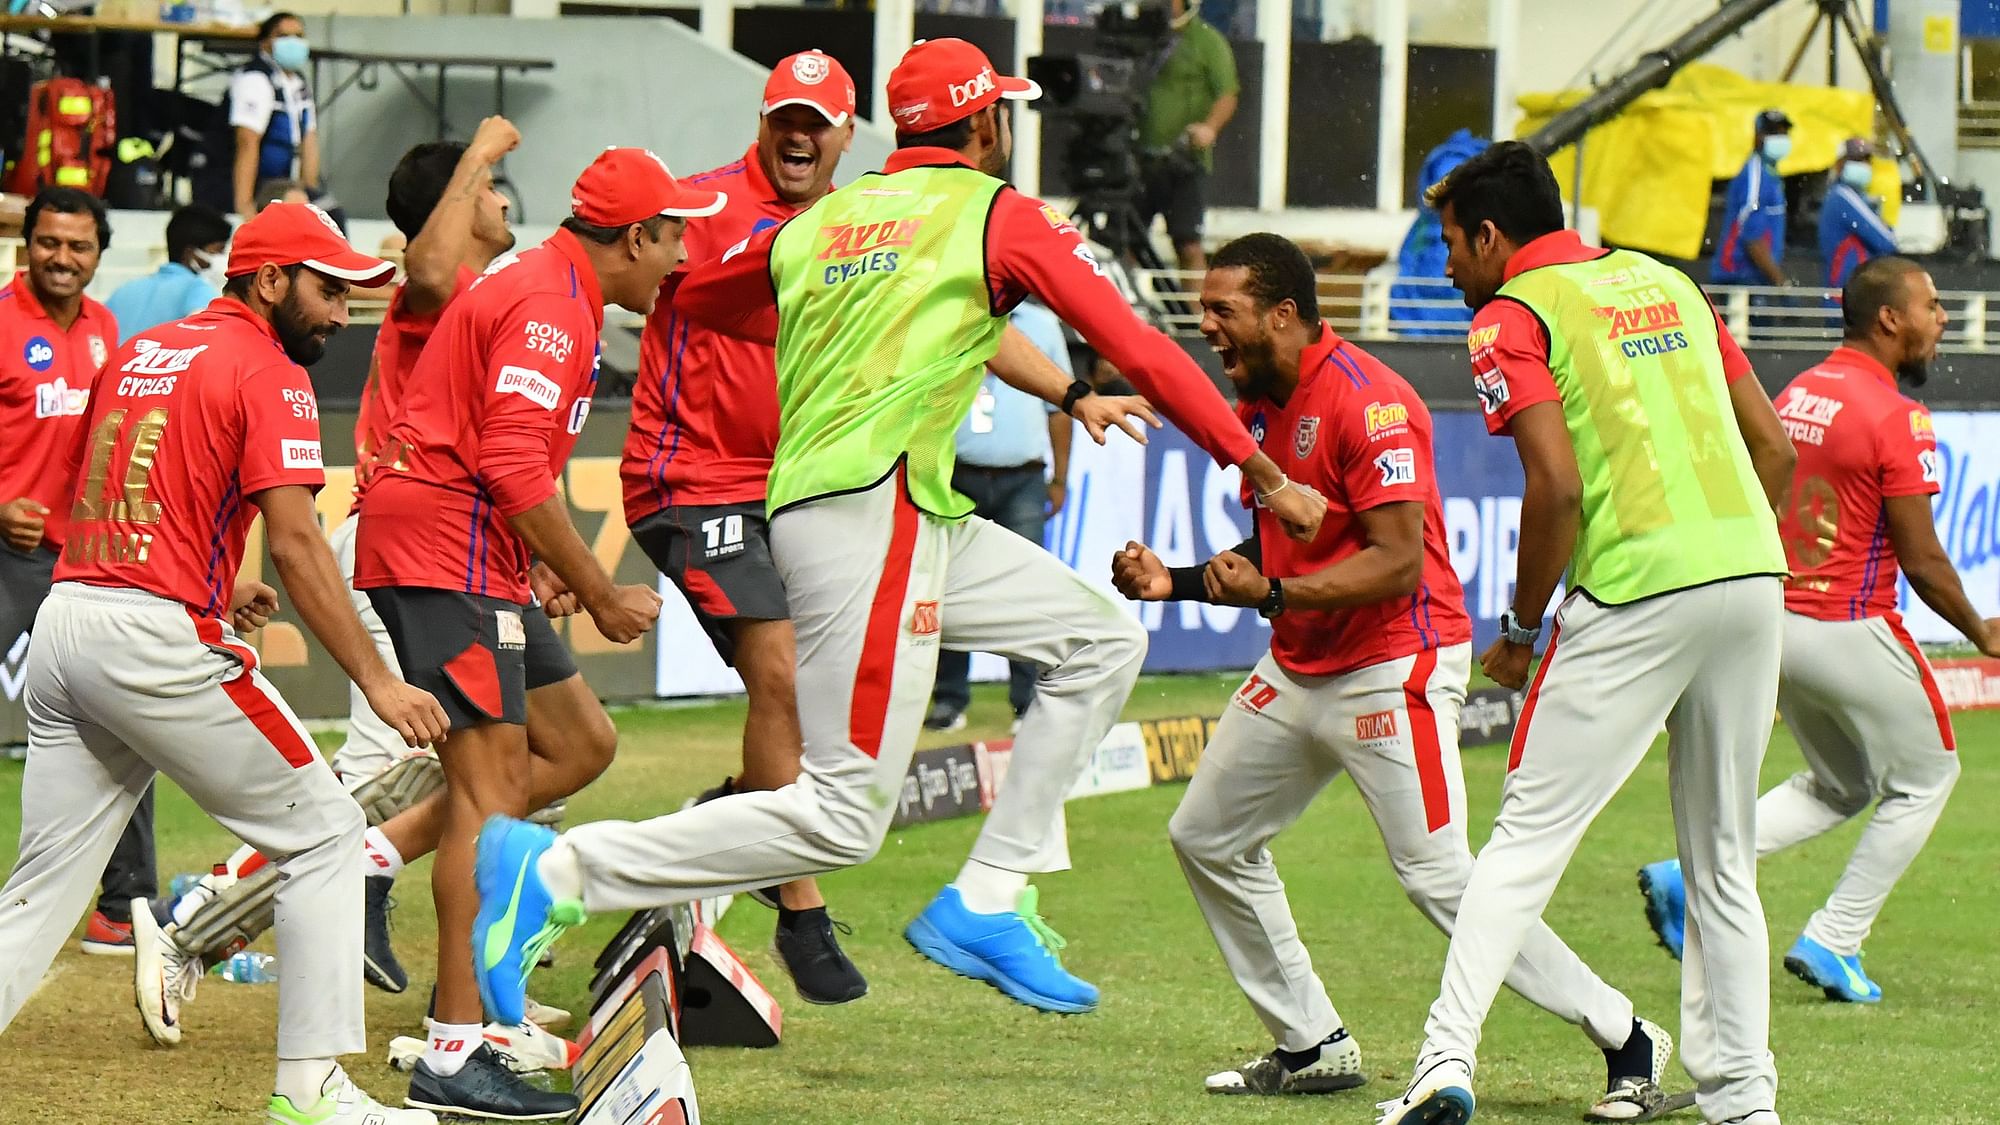 Kings XI Punjab defeated Mumbai Indians in a game that featured two Super Overs on Sunday, 18 October.